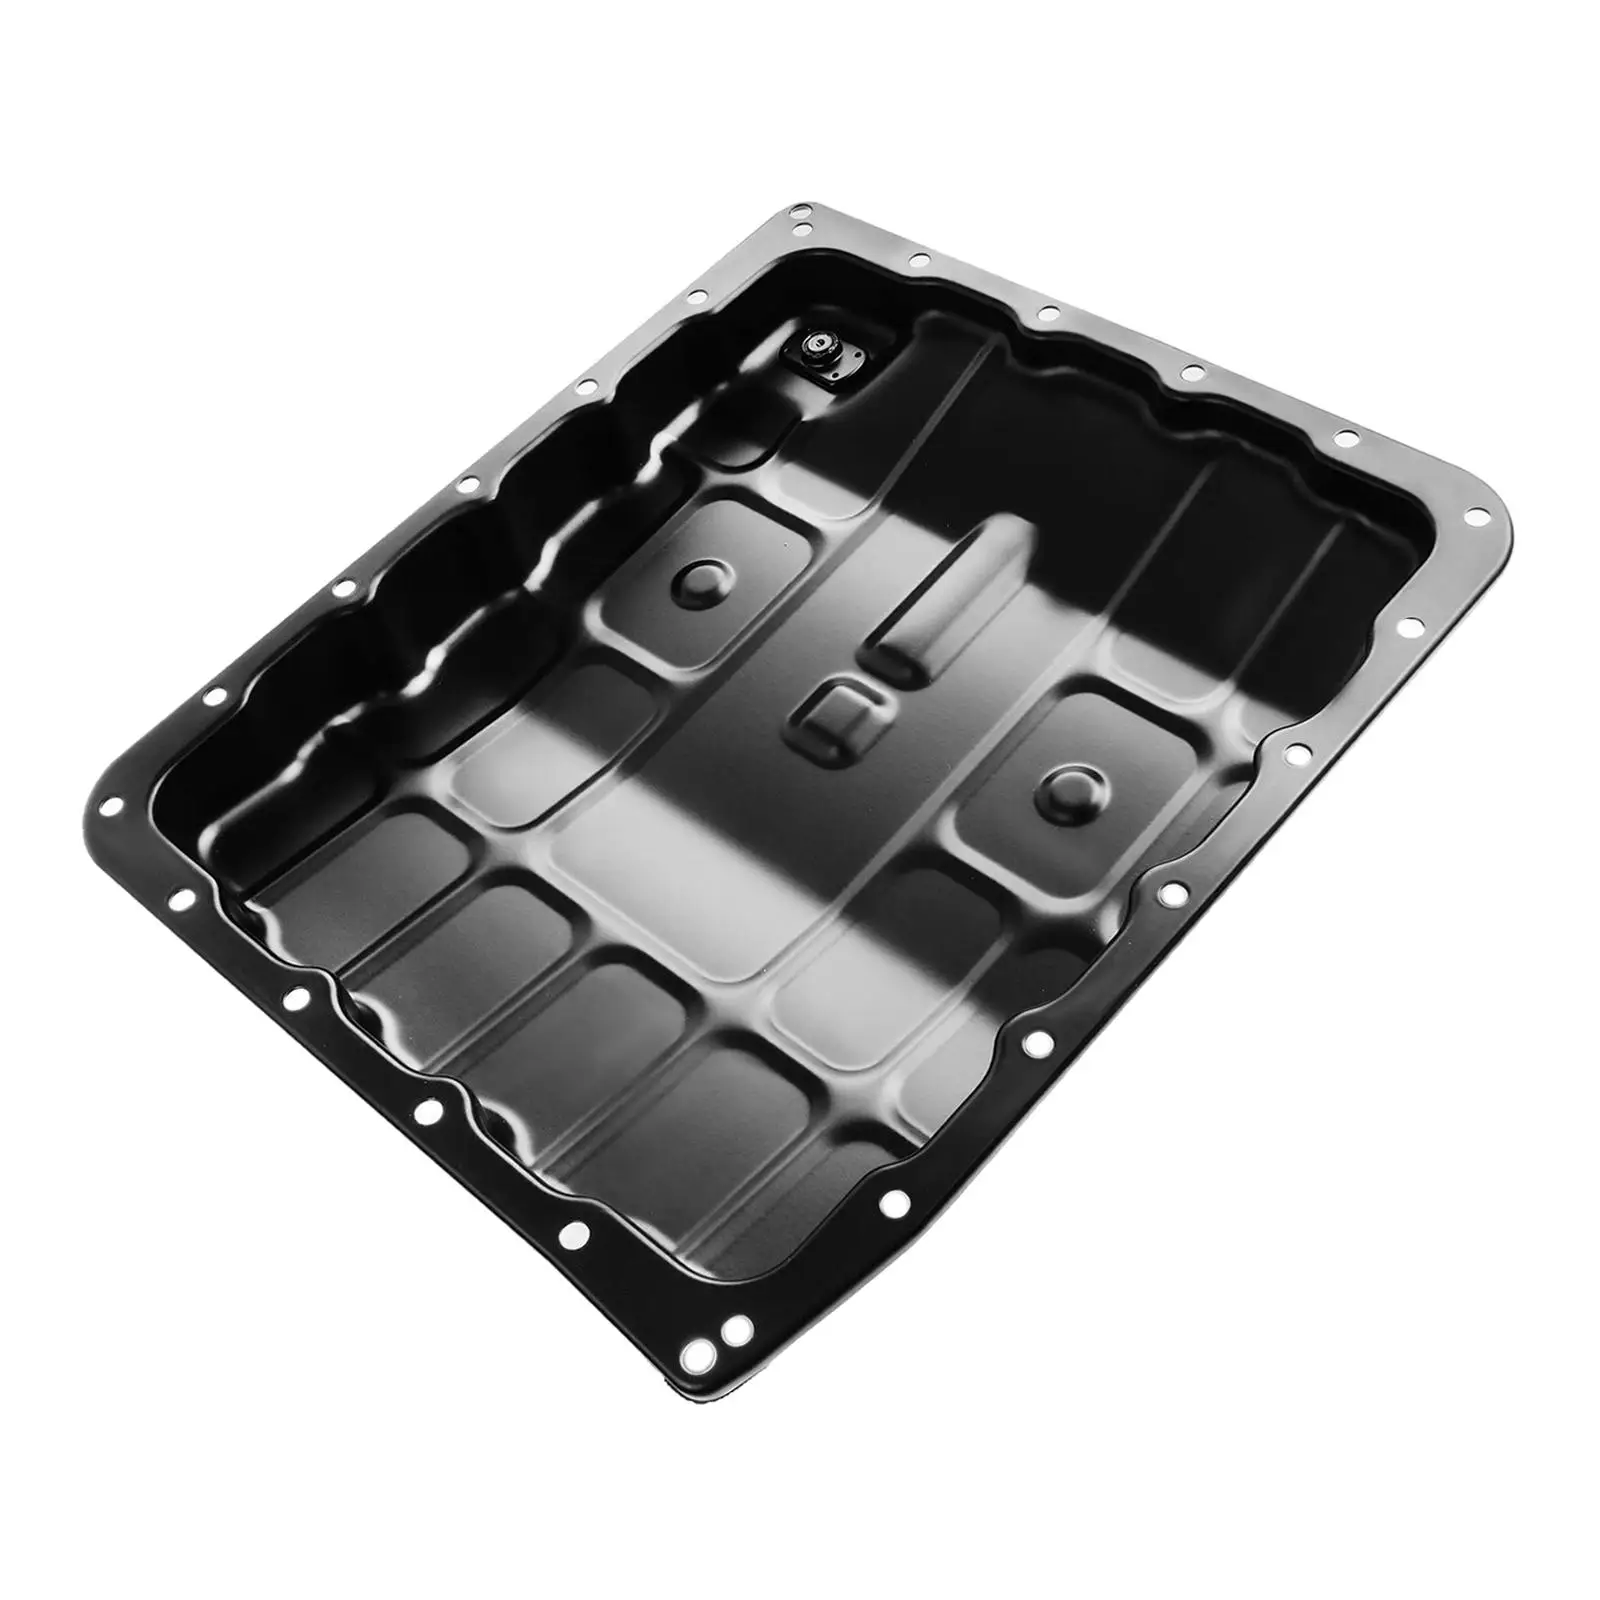 Transmission Oil Pan 3139090x0B Supplies Stable Performance Direct Replaces Car for Nissan Pathfinder Titan Armada Frontier